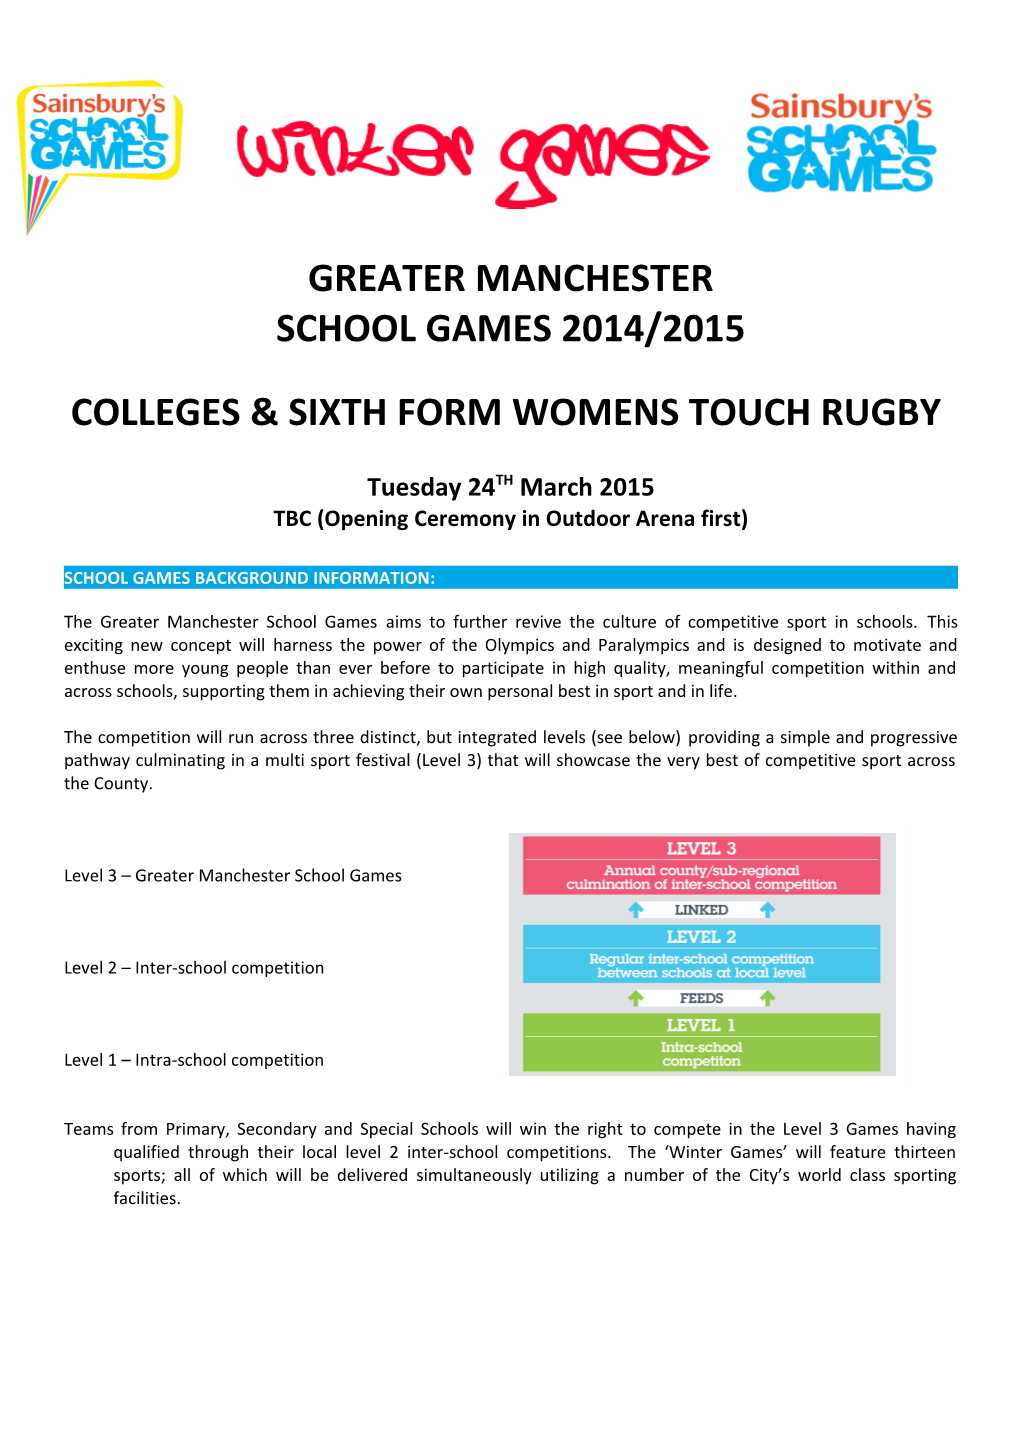 Colleges & Sixth Form Womens Touch Rugby